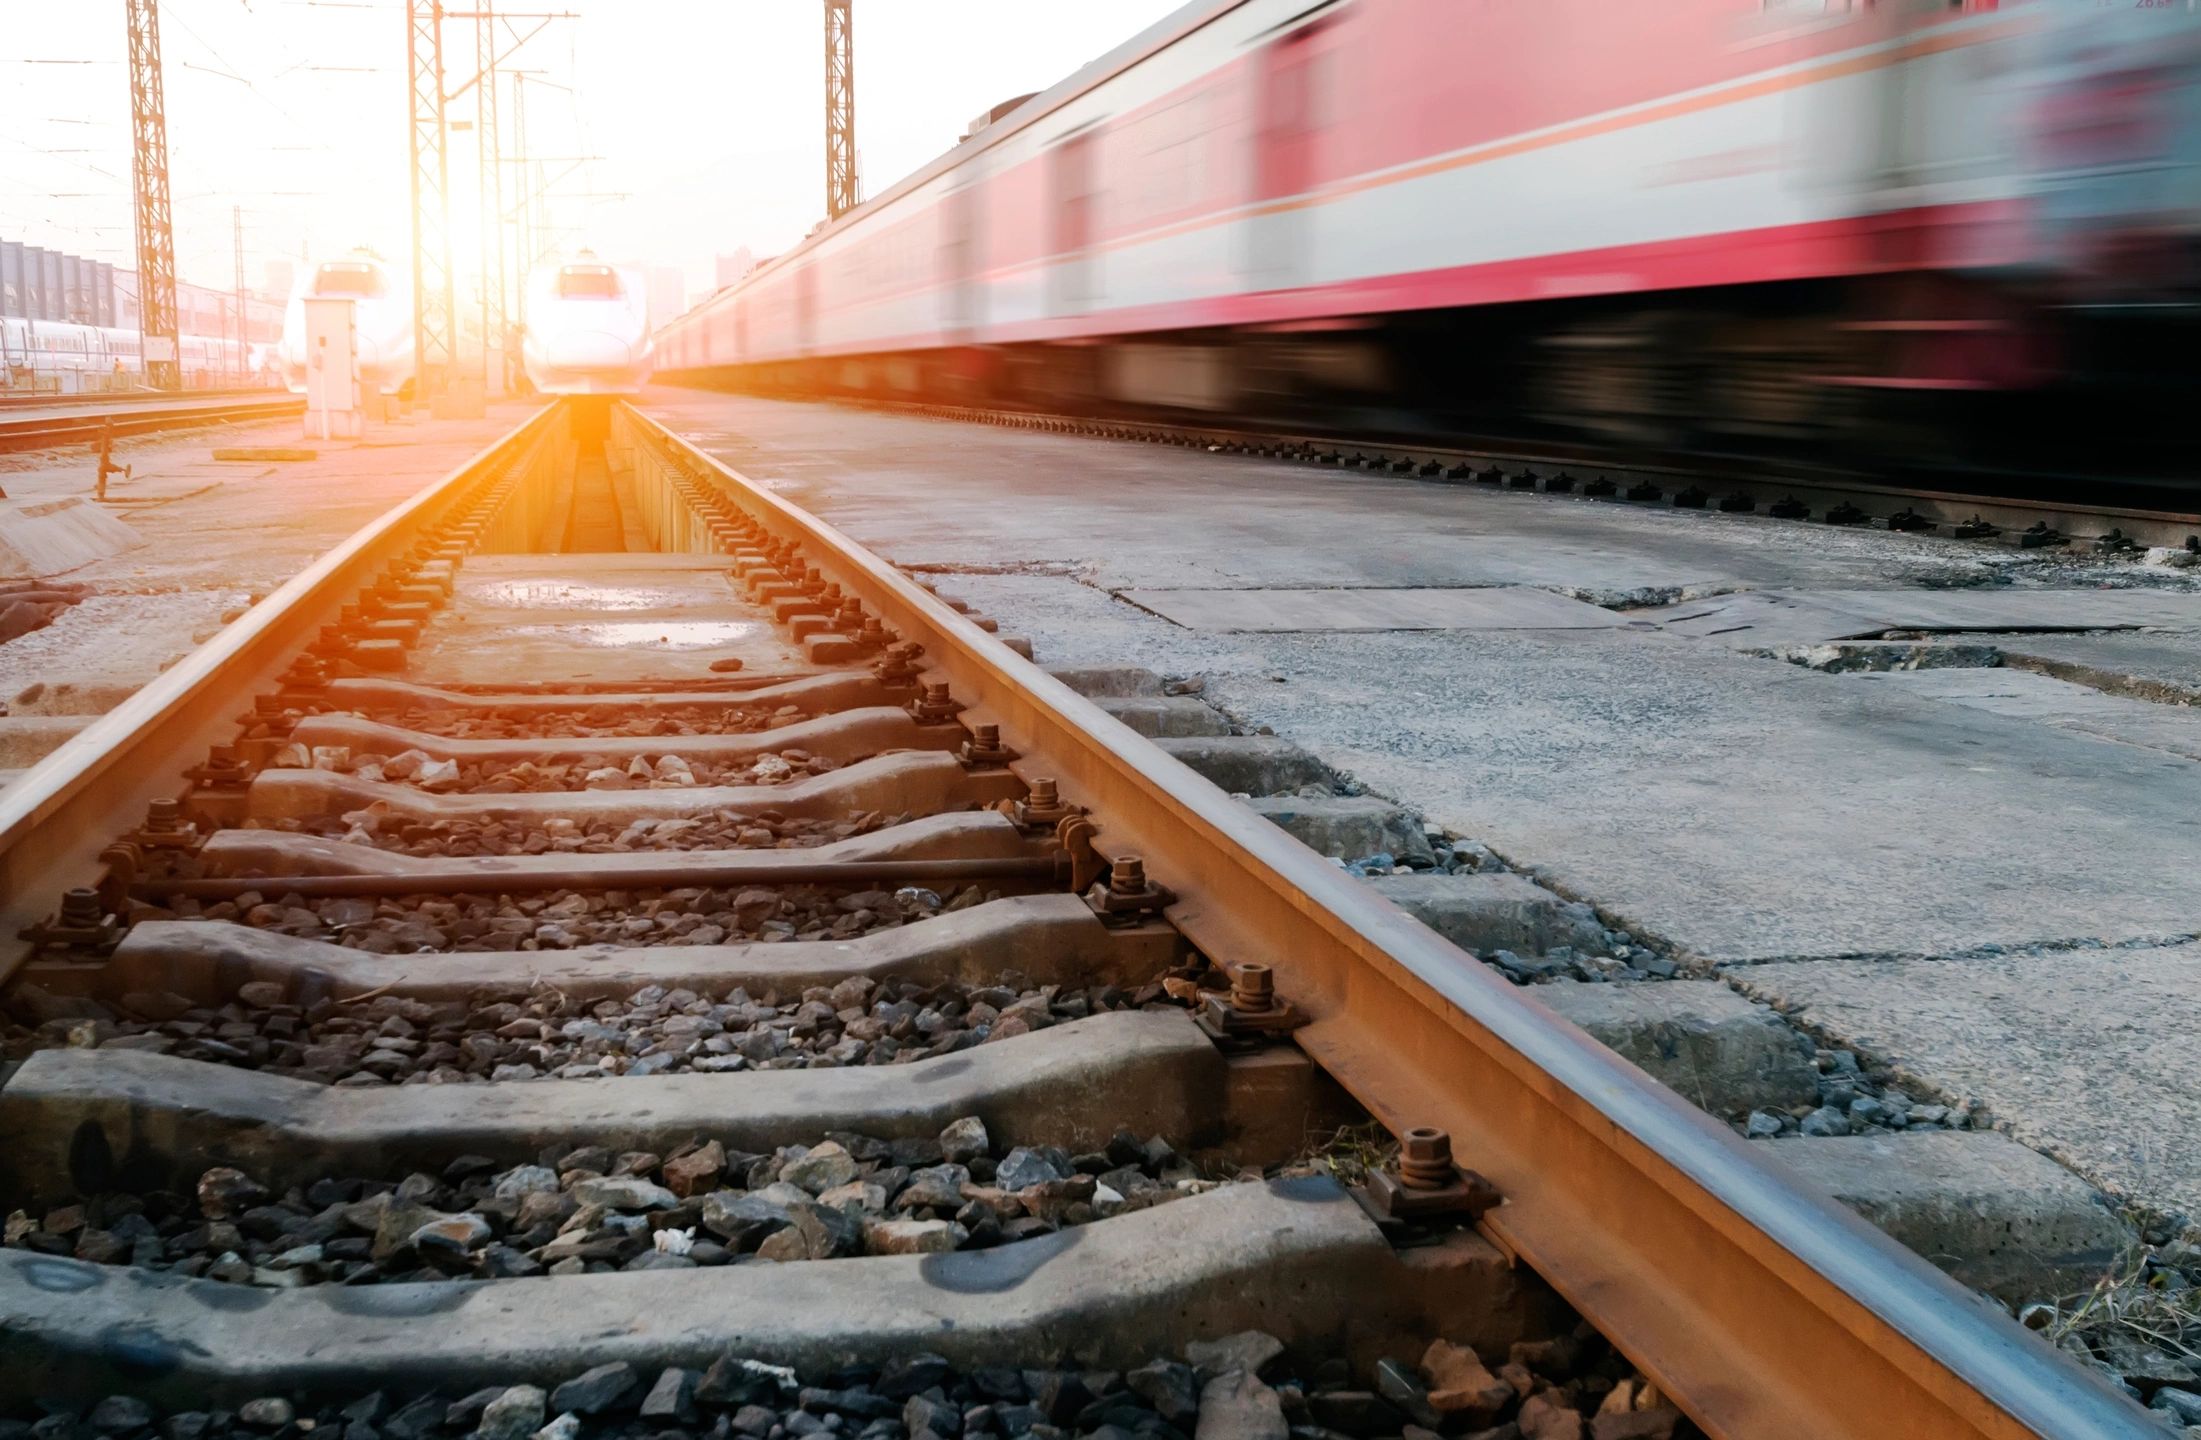 What Are the Most Common Dangers Faced by Railway Workers?